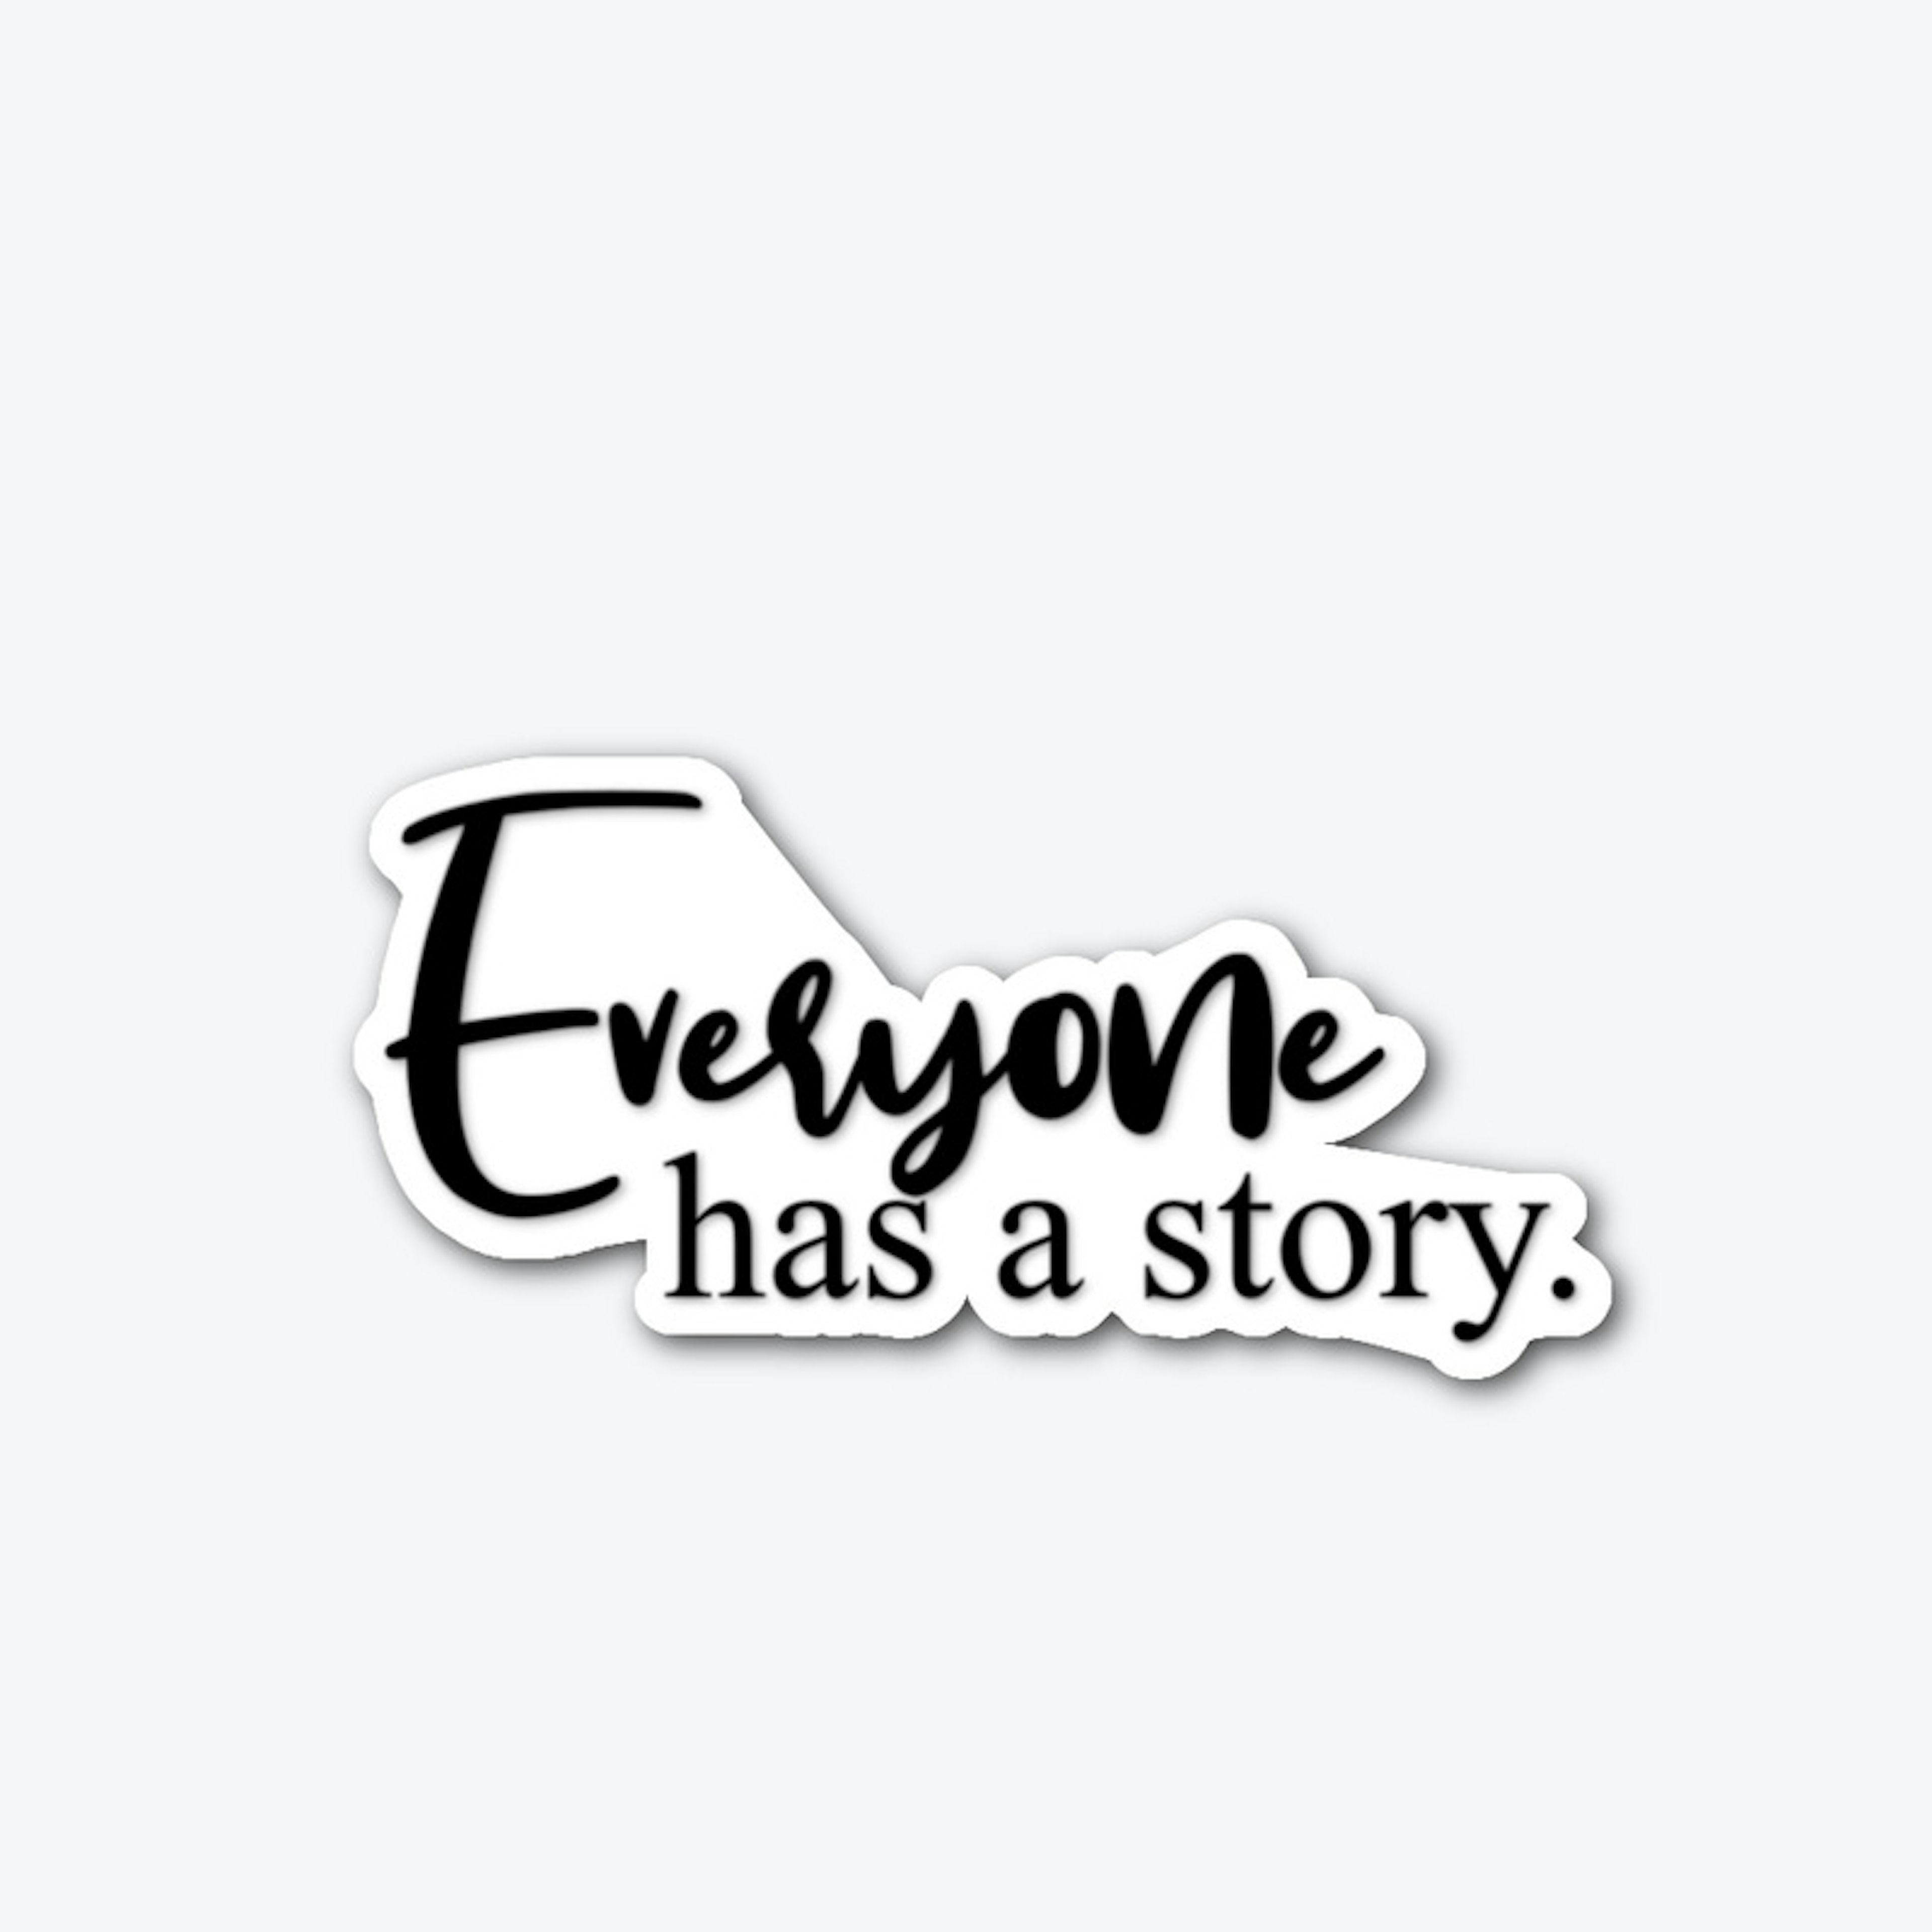 Everyone Has A Story.